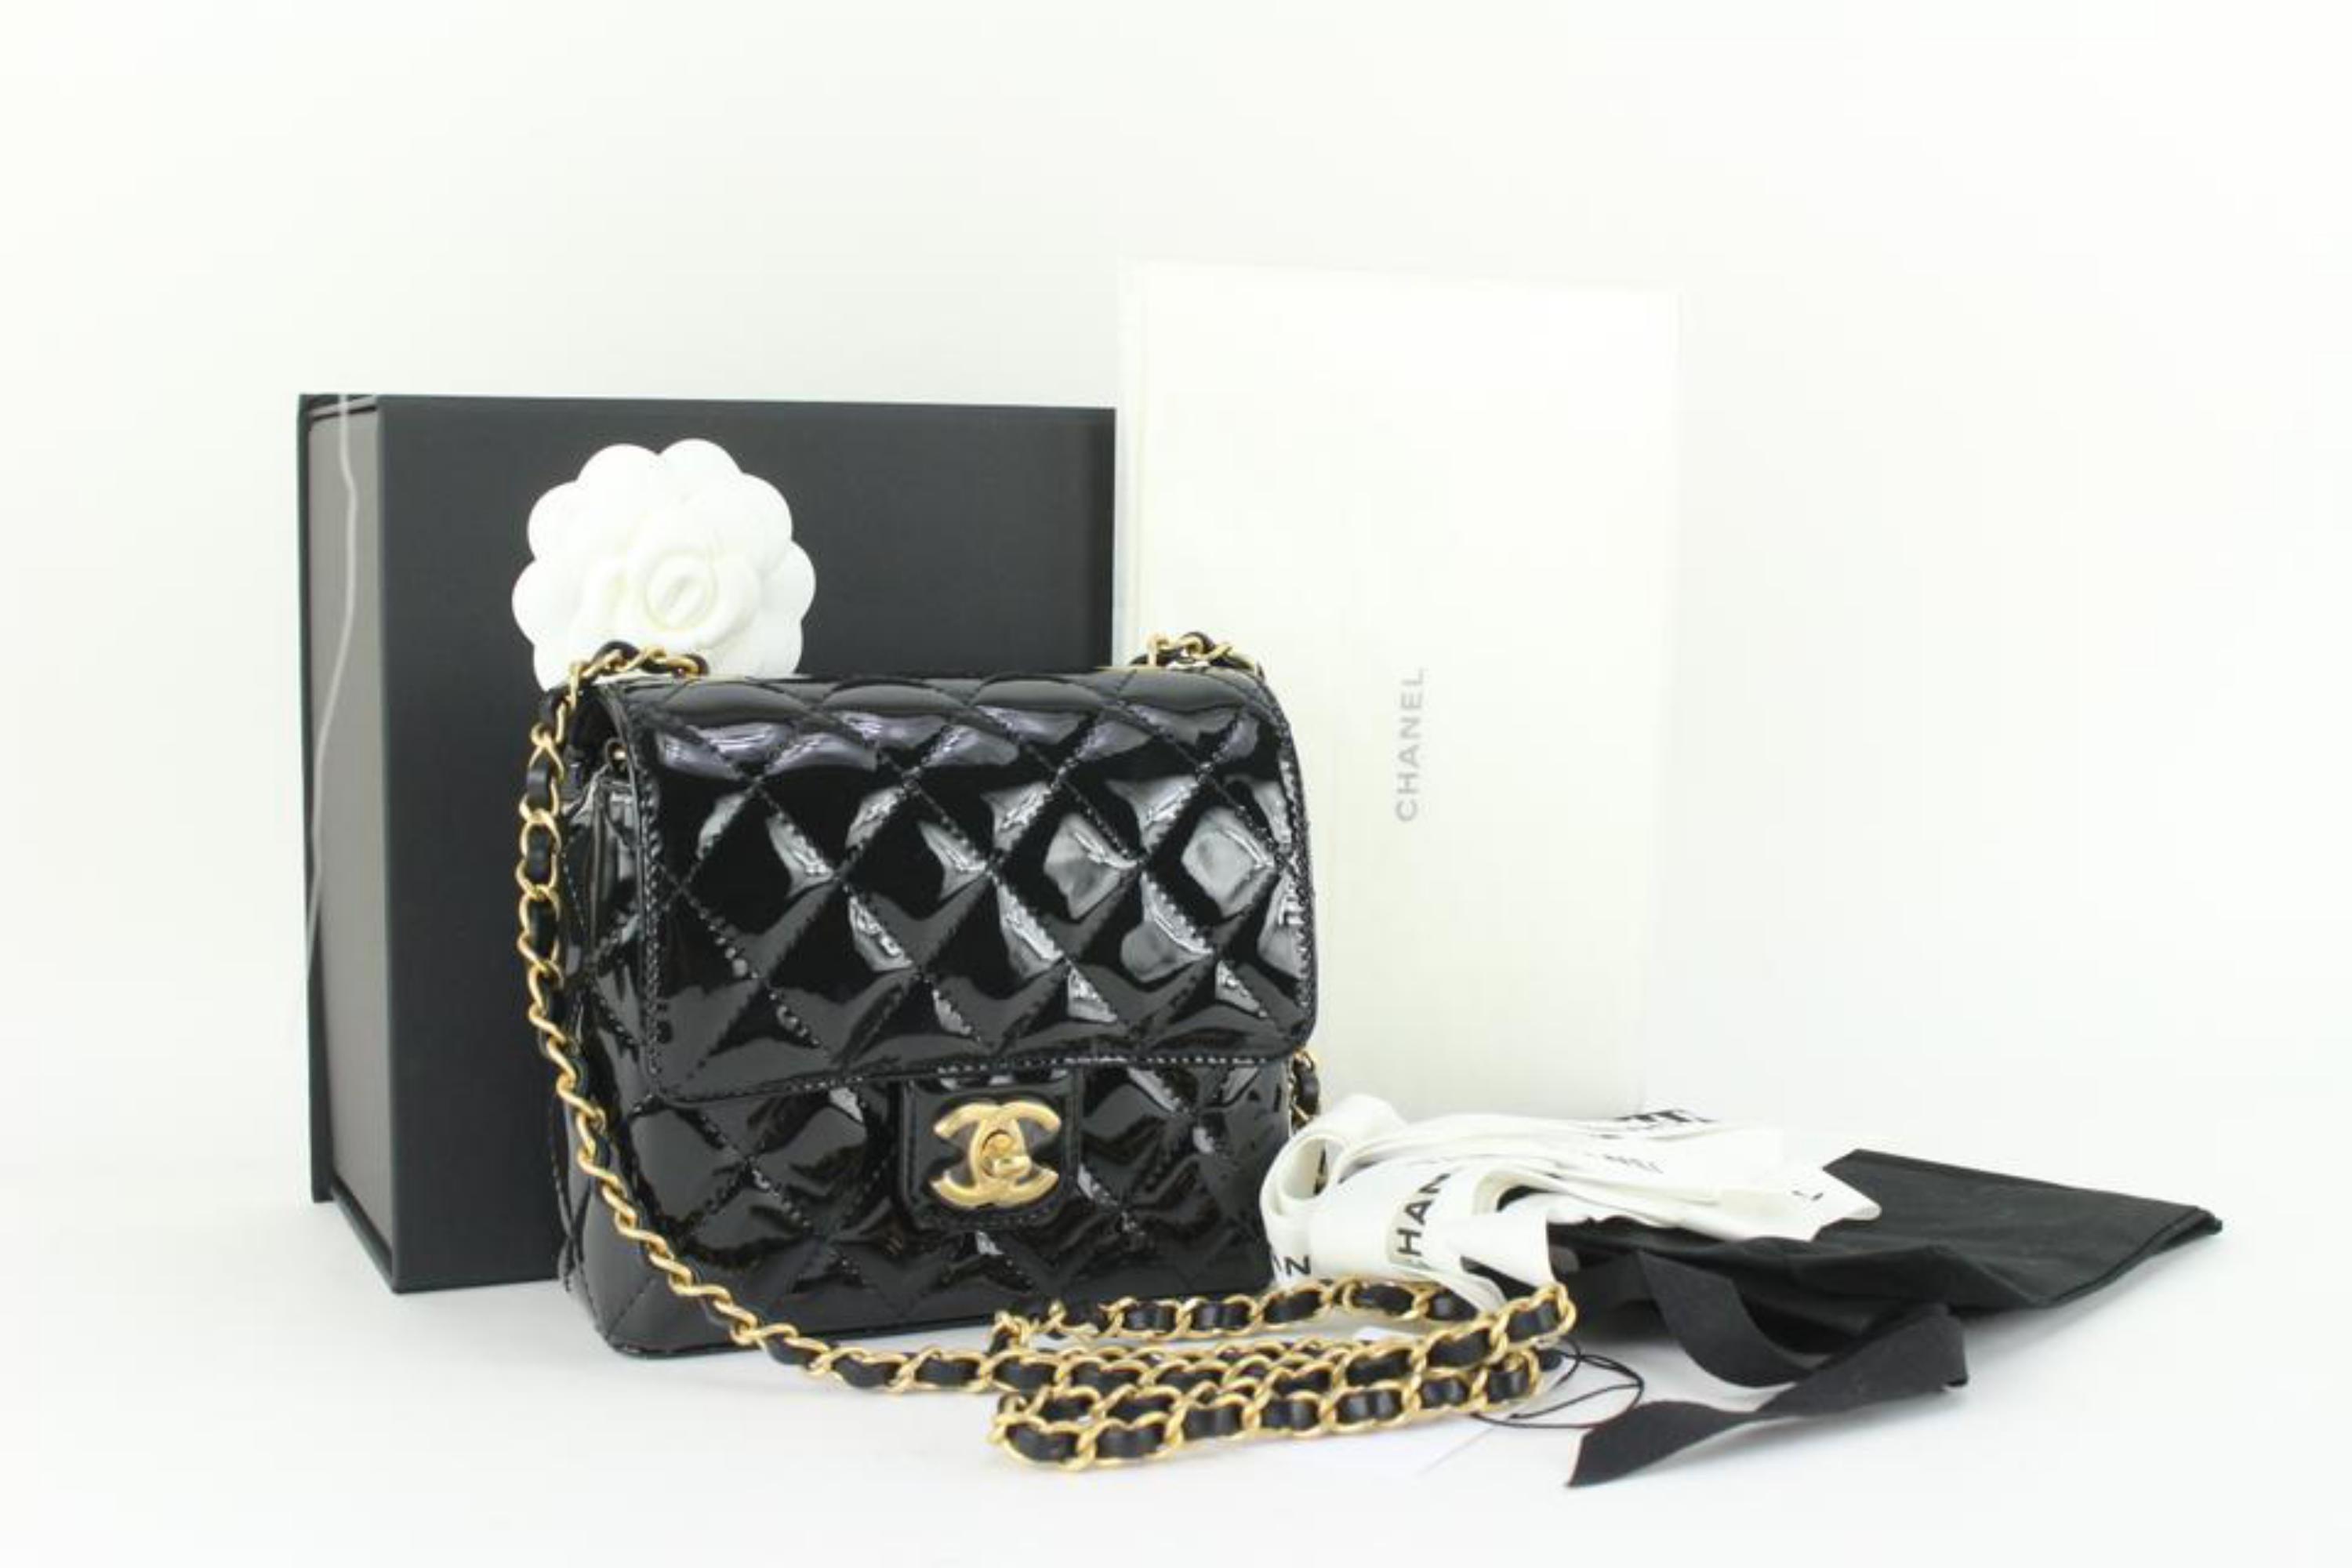 Chanel black patent leather caviar wallet on chain